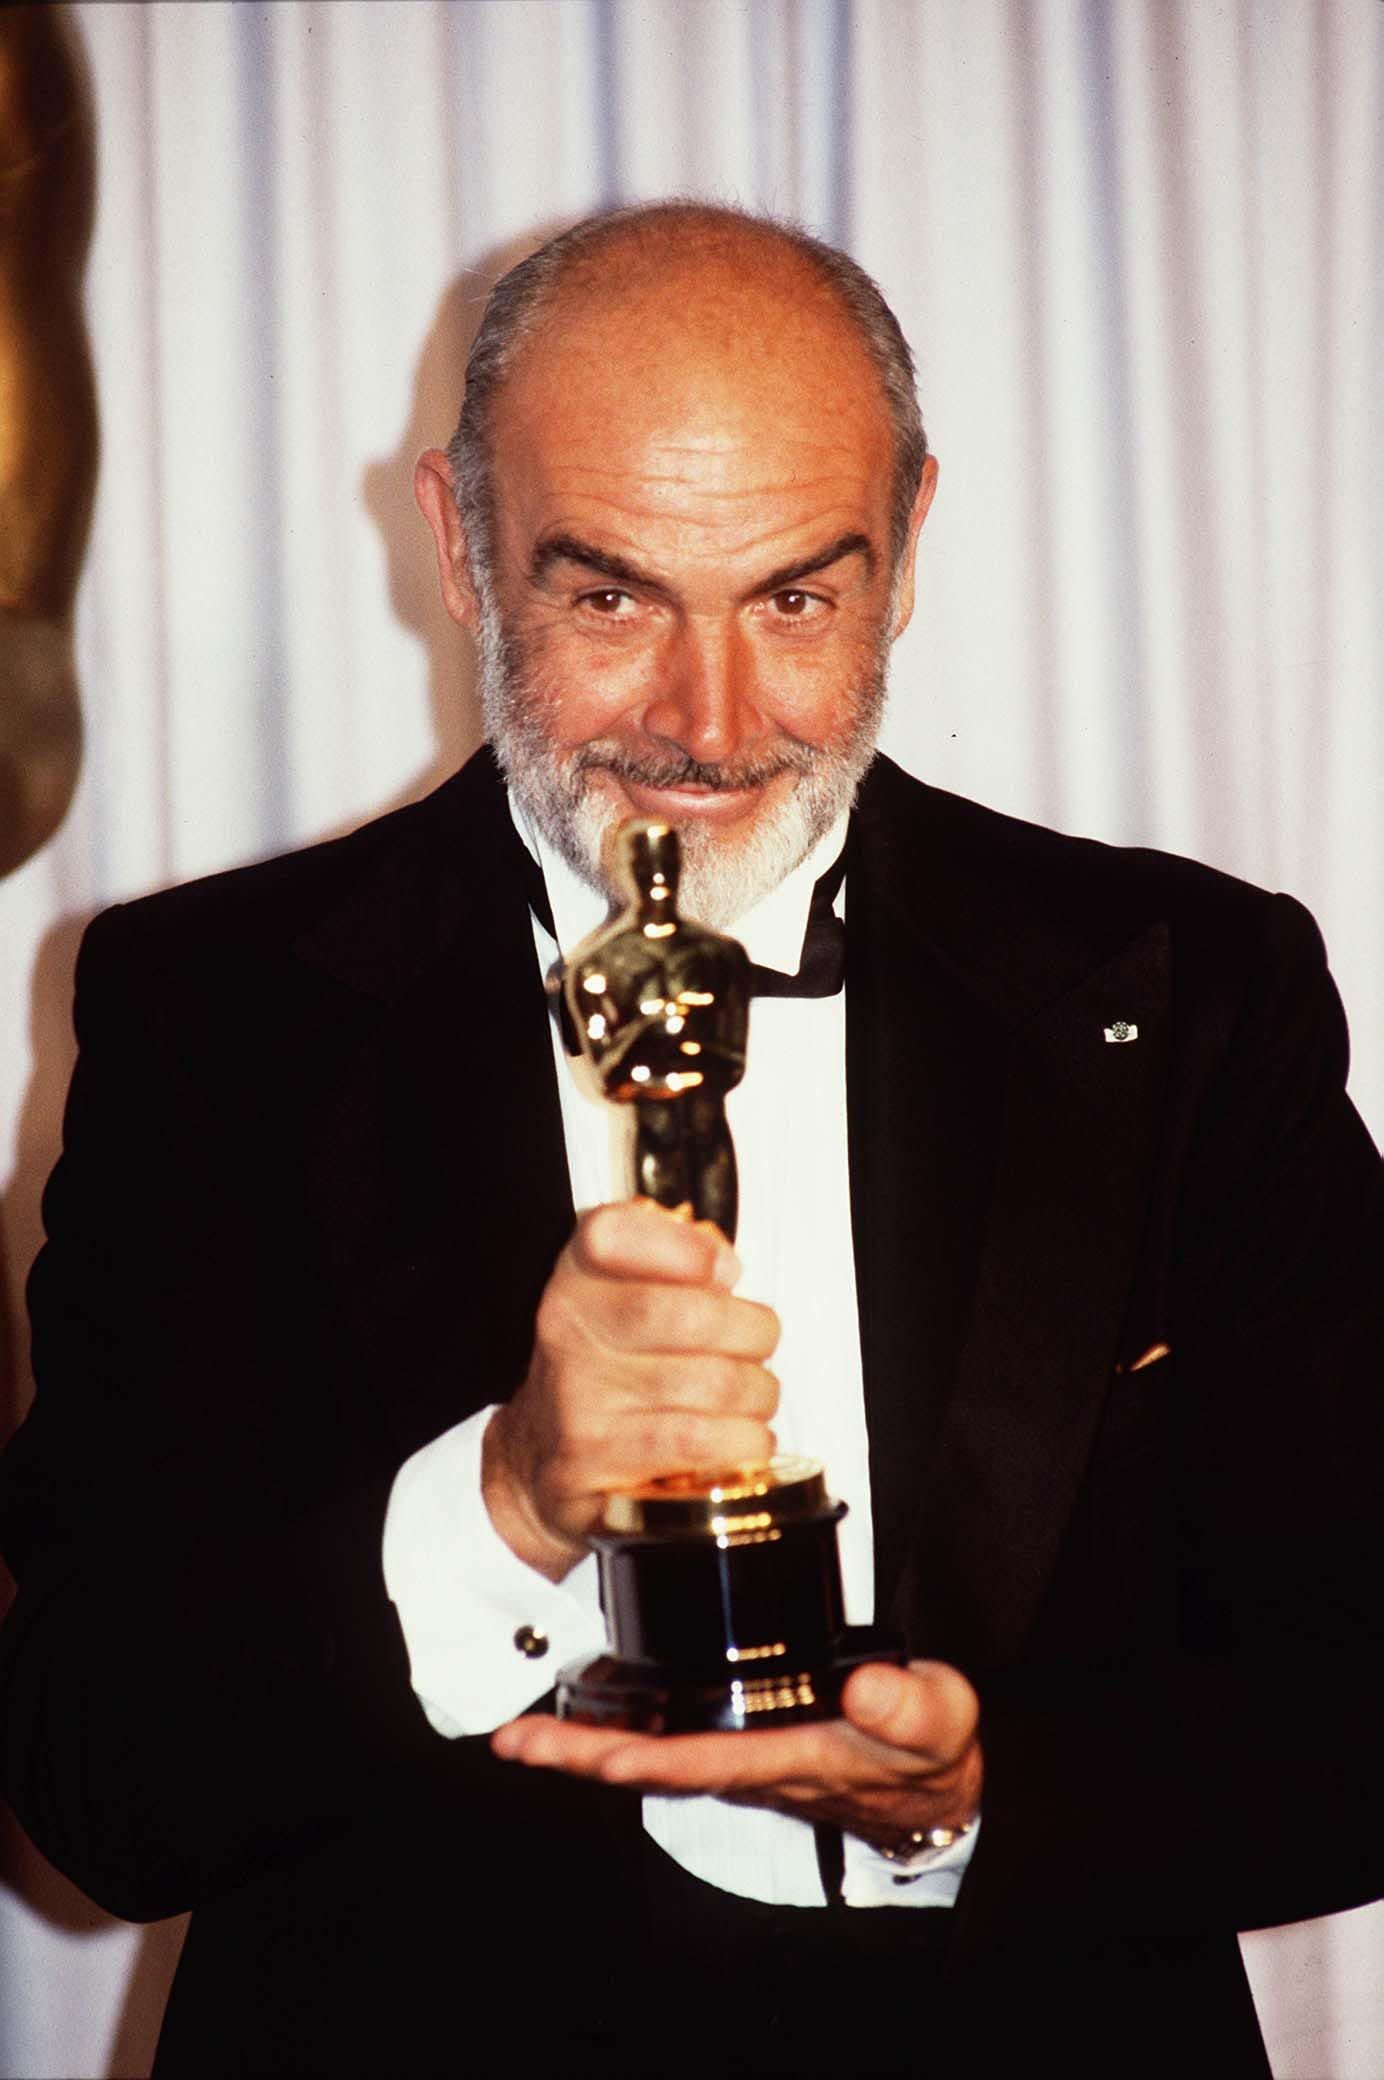 Scottish Actor Sean Connery holding an Academy Award for Best Actor in a Supporting Role iduring the 1988 Oscars Ceremony | Photo: Photoshot/Getty Images